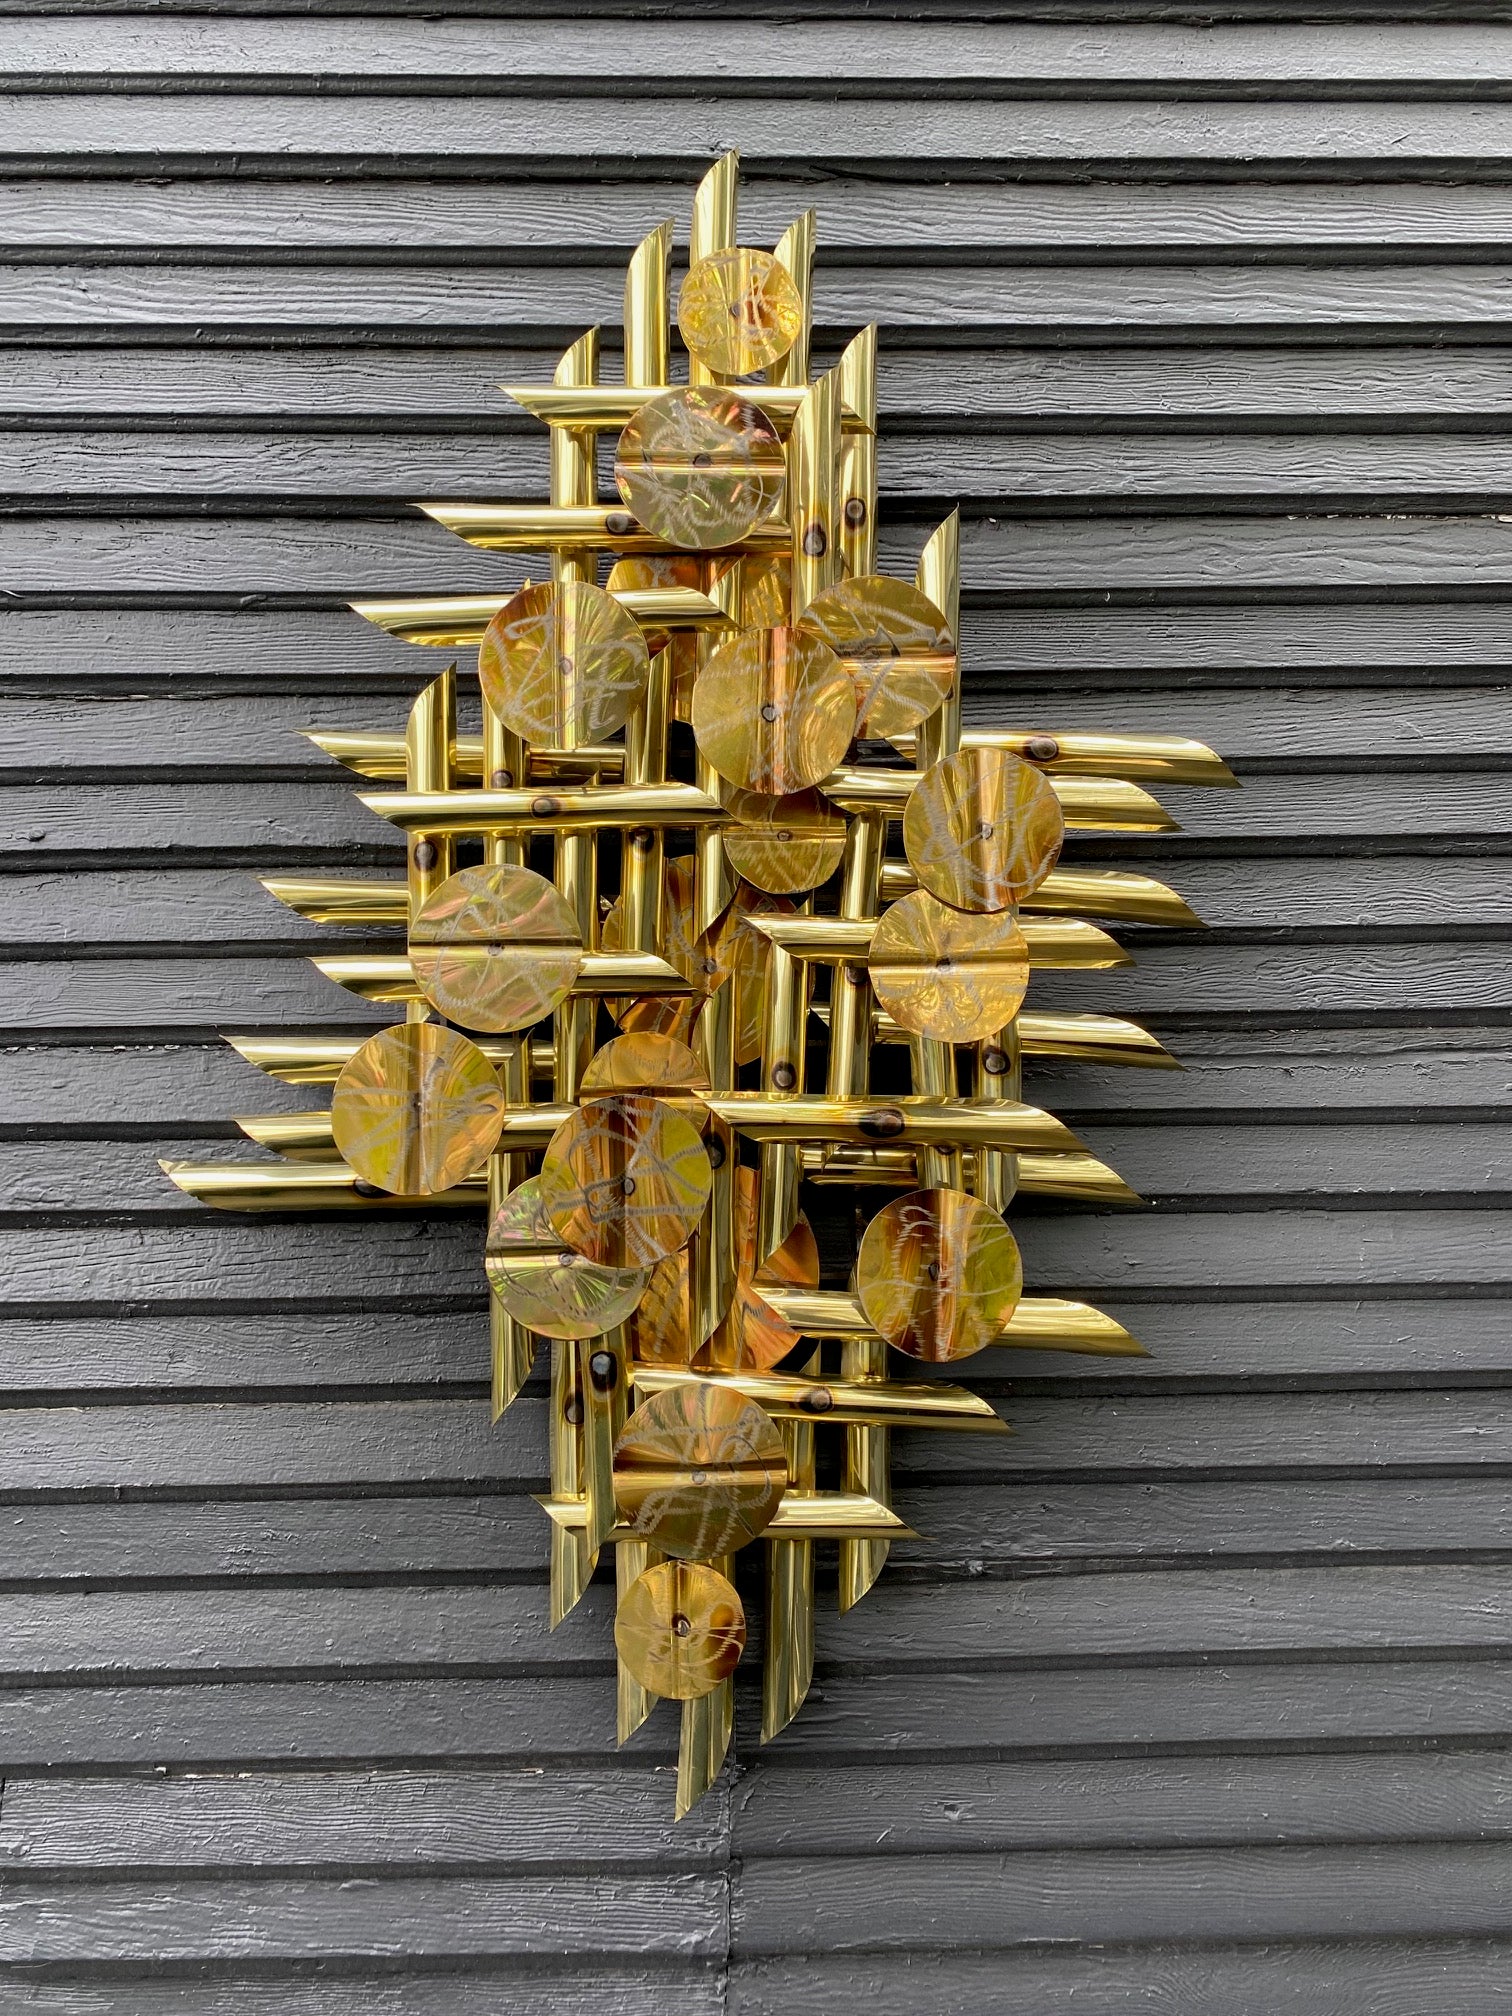 A striking mid-century torched metal art display in brass, with original label. Can be hung vertically or horizontally. Made in Canada.- Cook Street Vintage